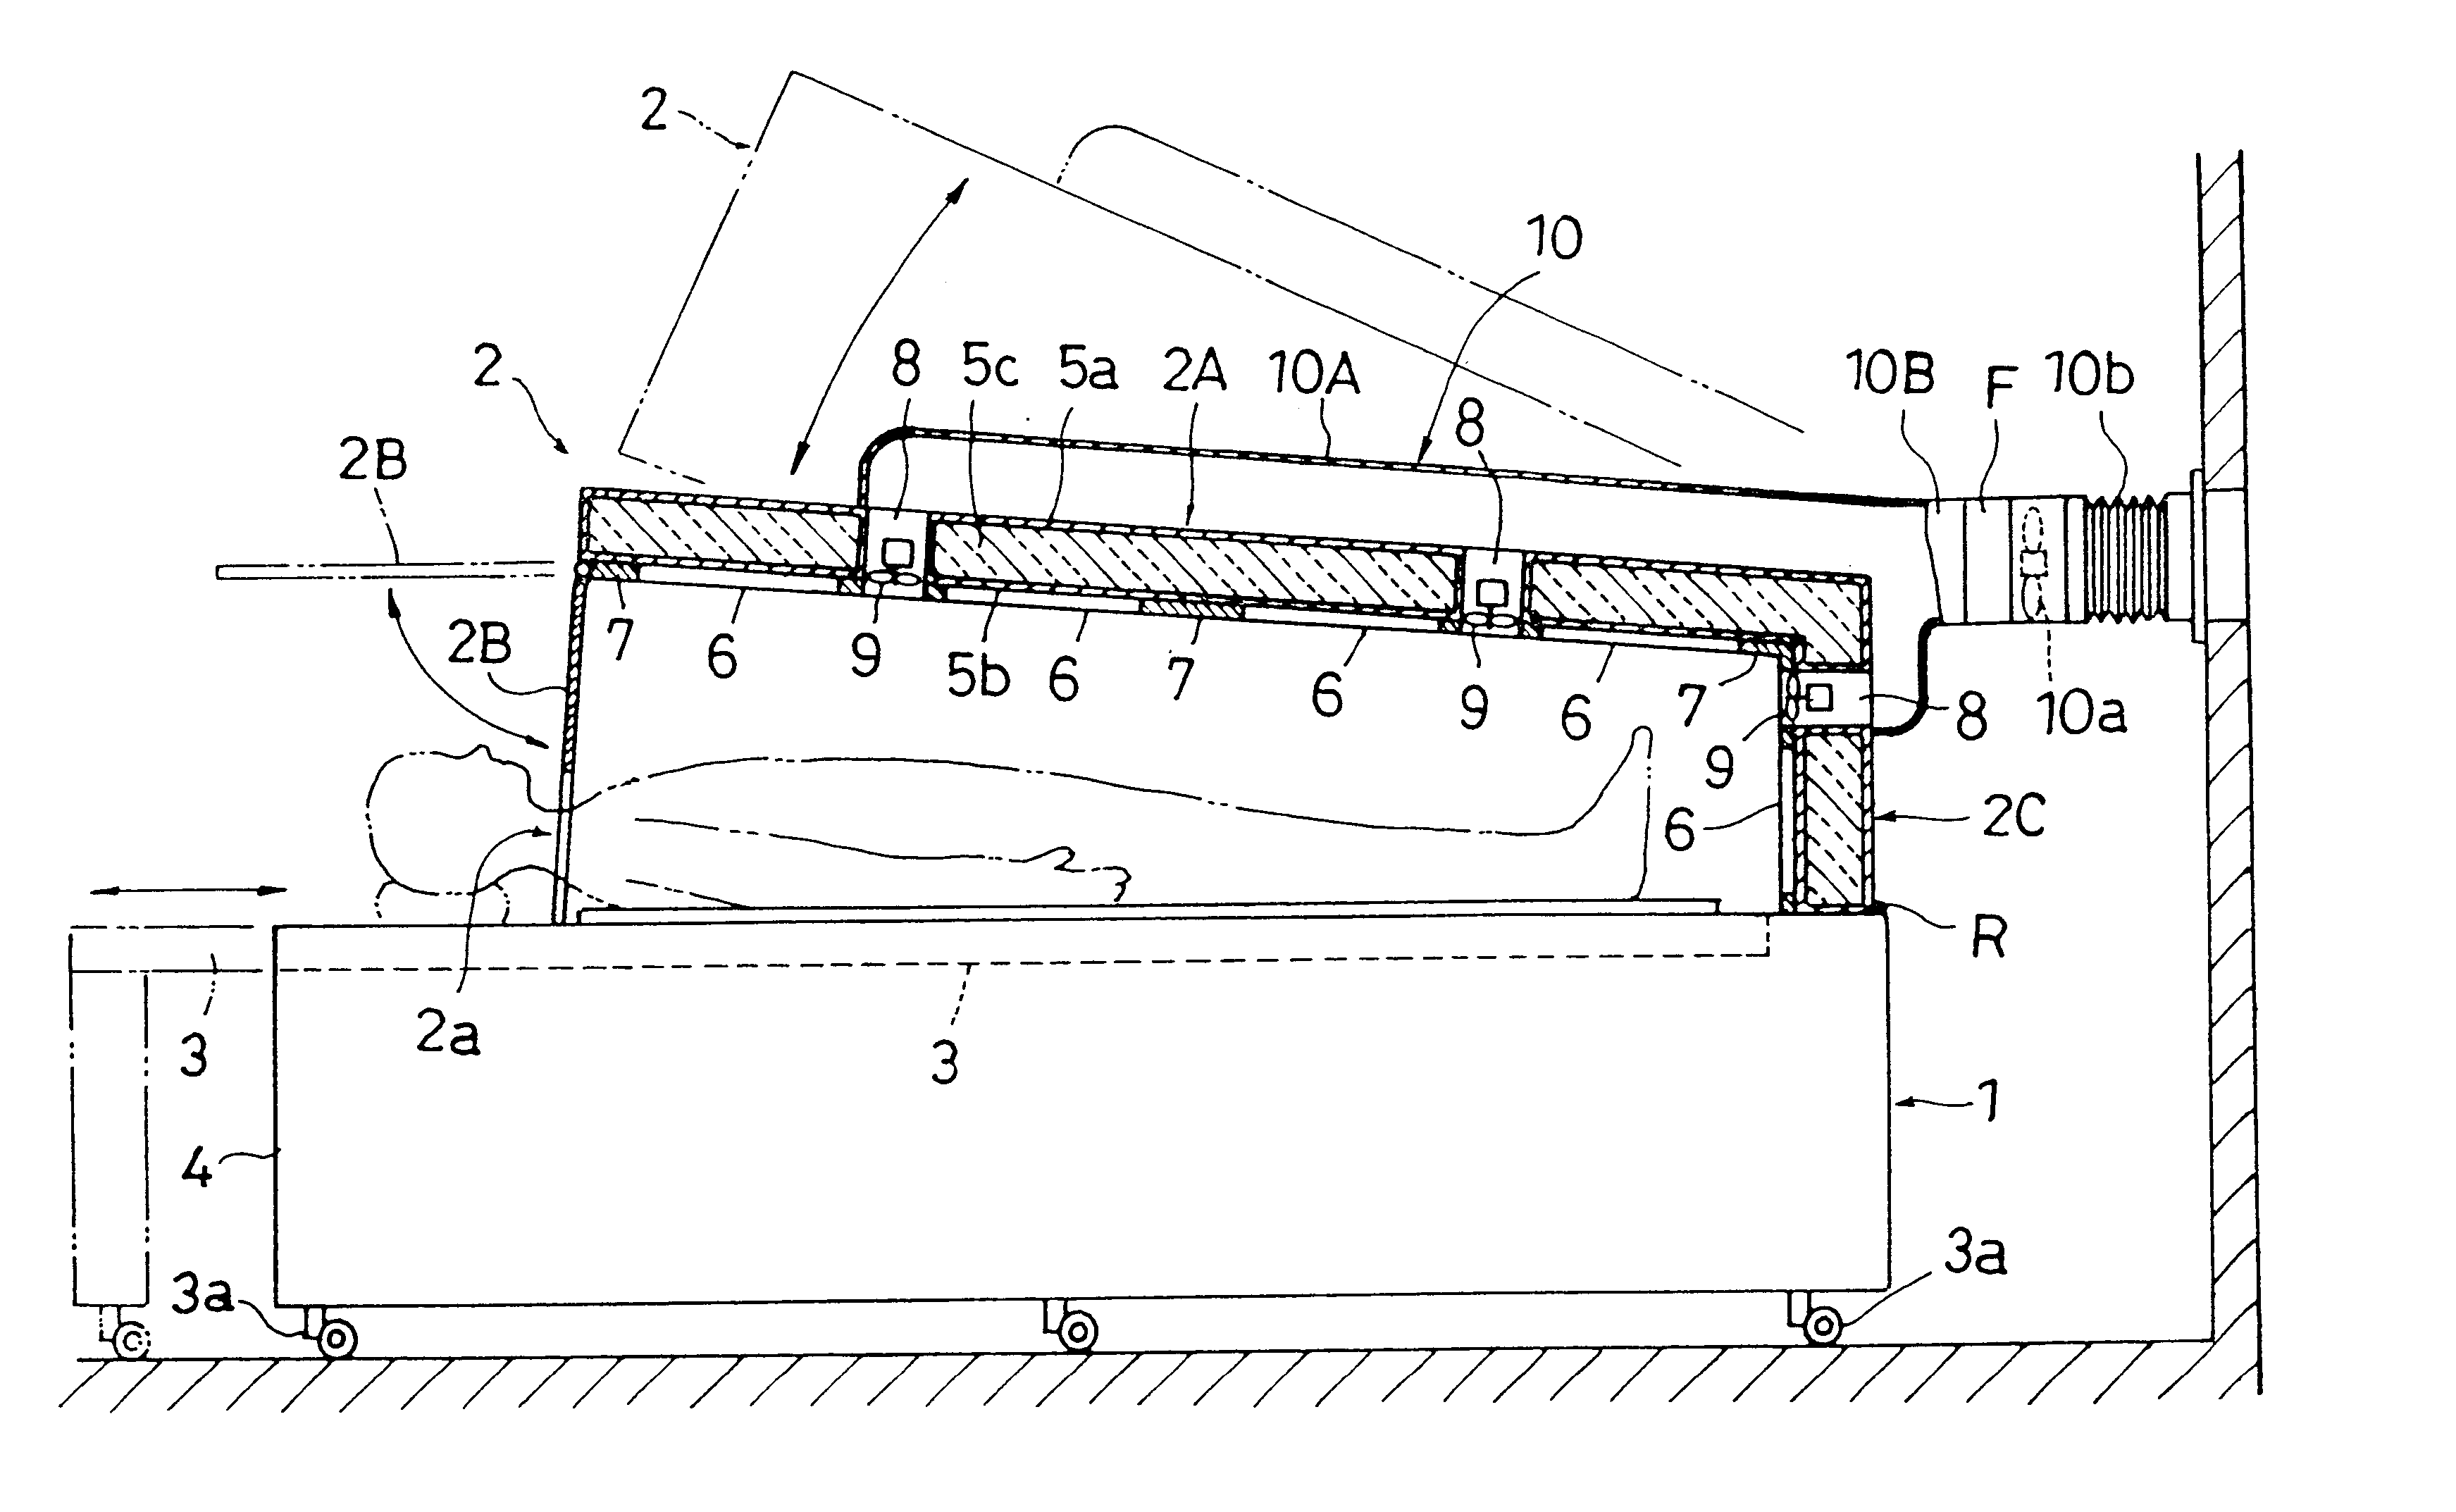 Whole body thermotherapy treatment apparatus